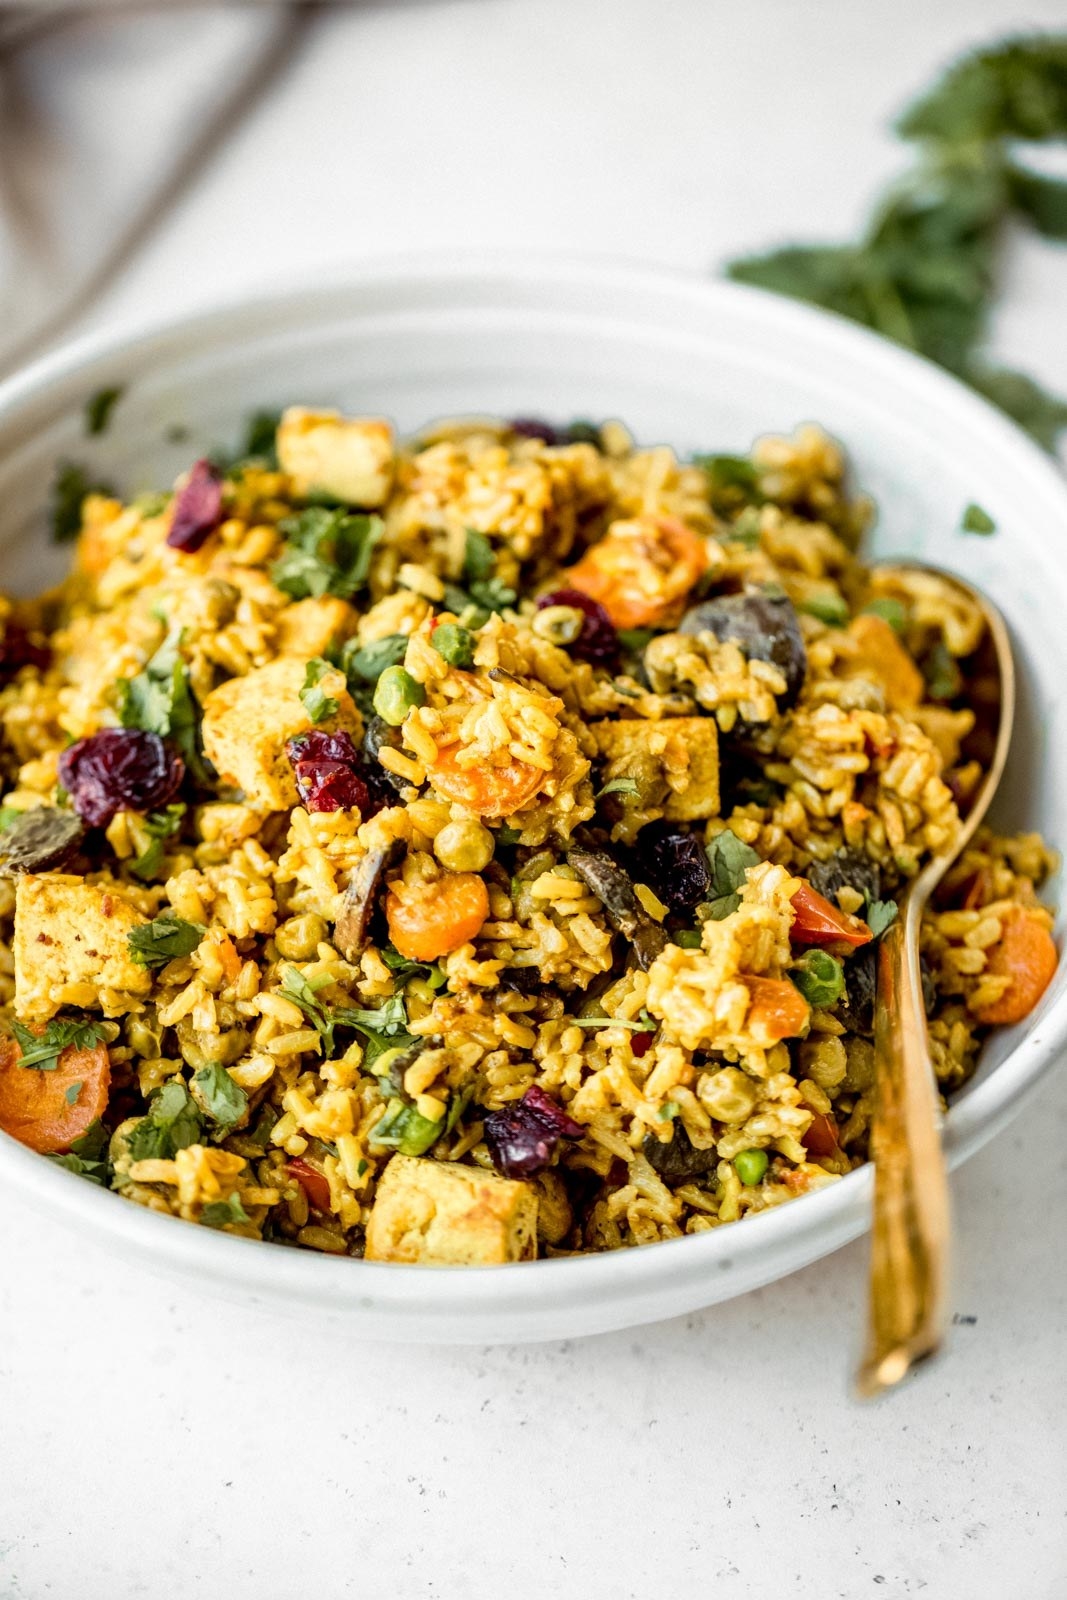 Coconut Curried Brown Rice With Tofu